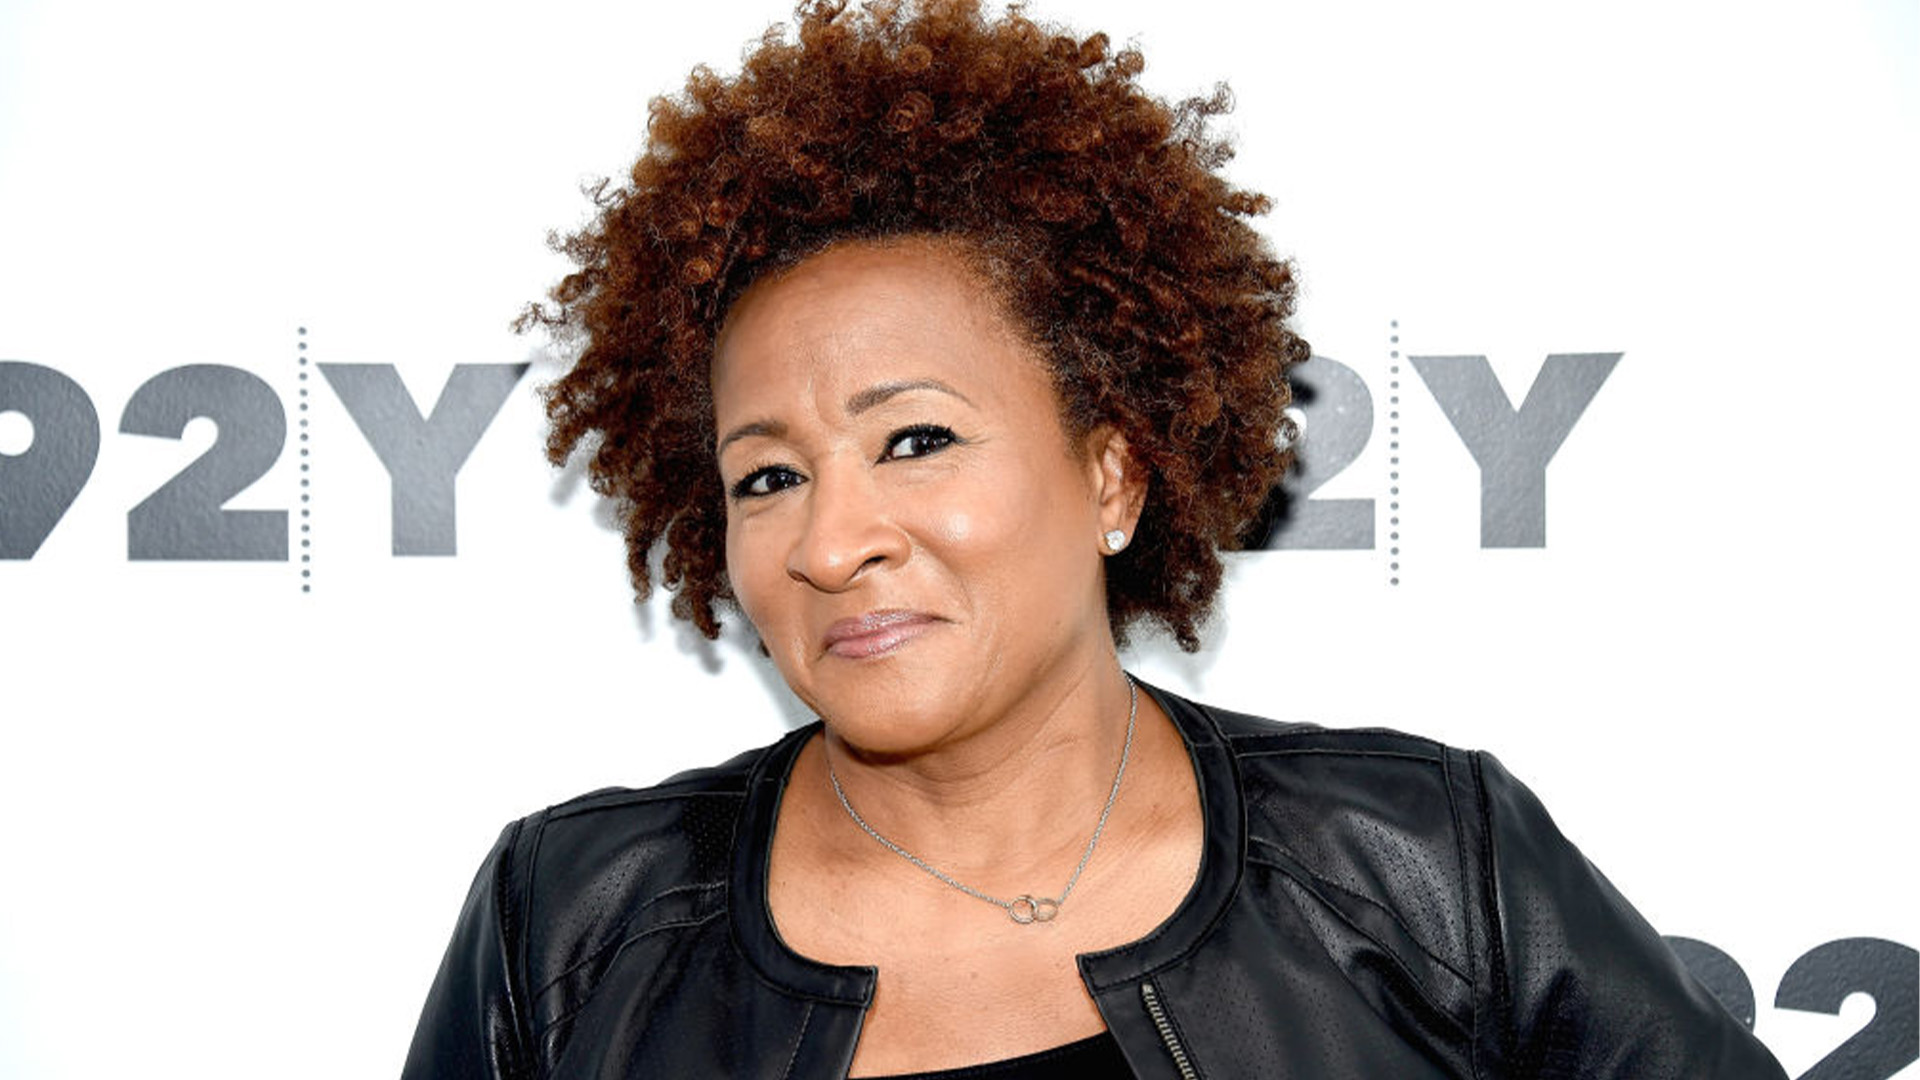 Wanda Sykes Earned A B.S. From Hampton, But Her Comedic Career Led To Her $10M Fortune